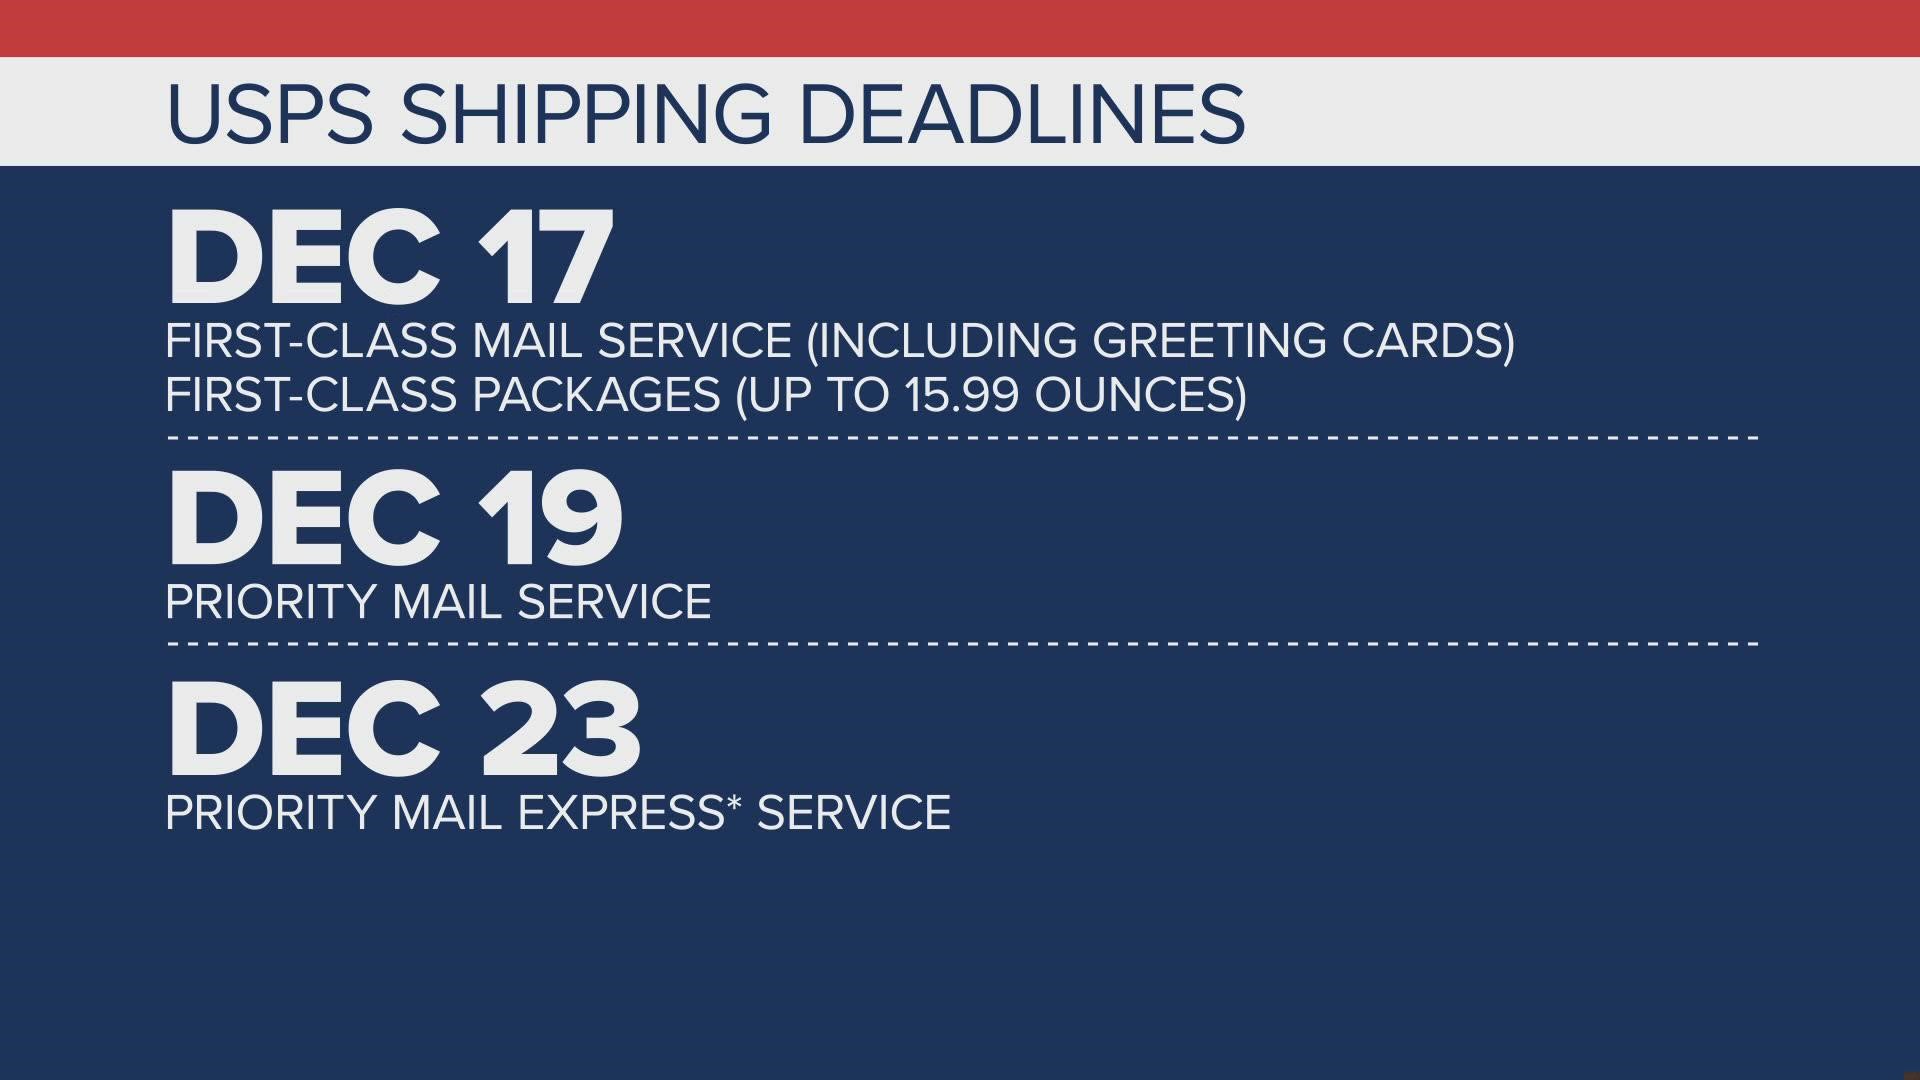 UPS, Fed Ex and the Postal Service say  you should plan to ship packages by the middle of December.